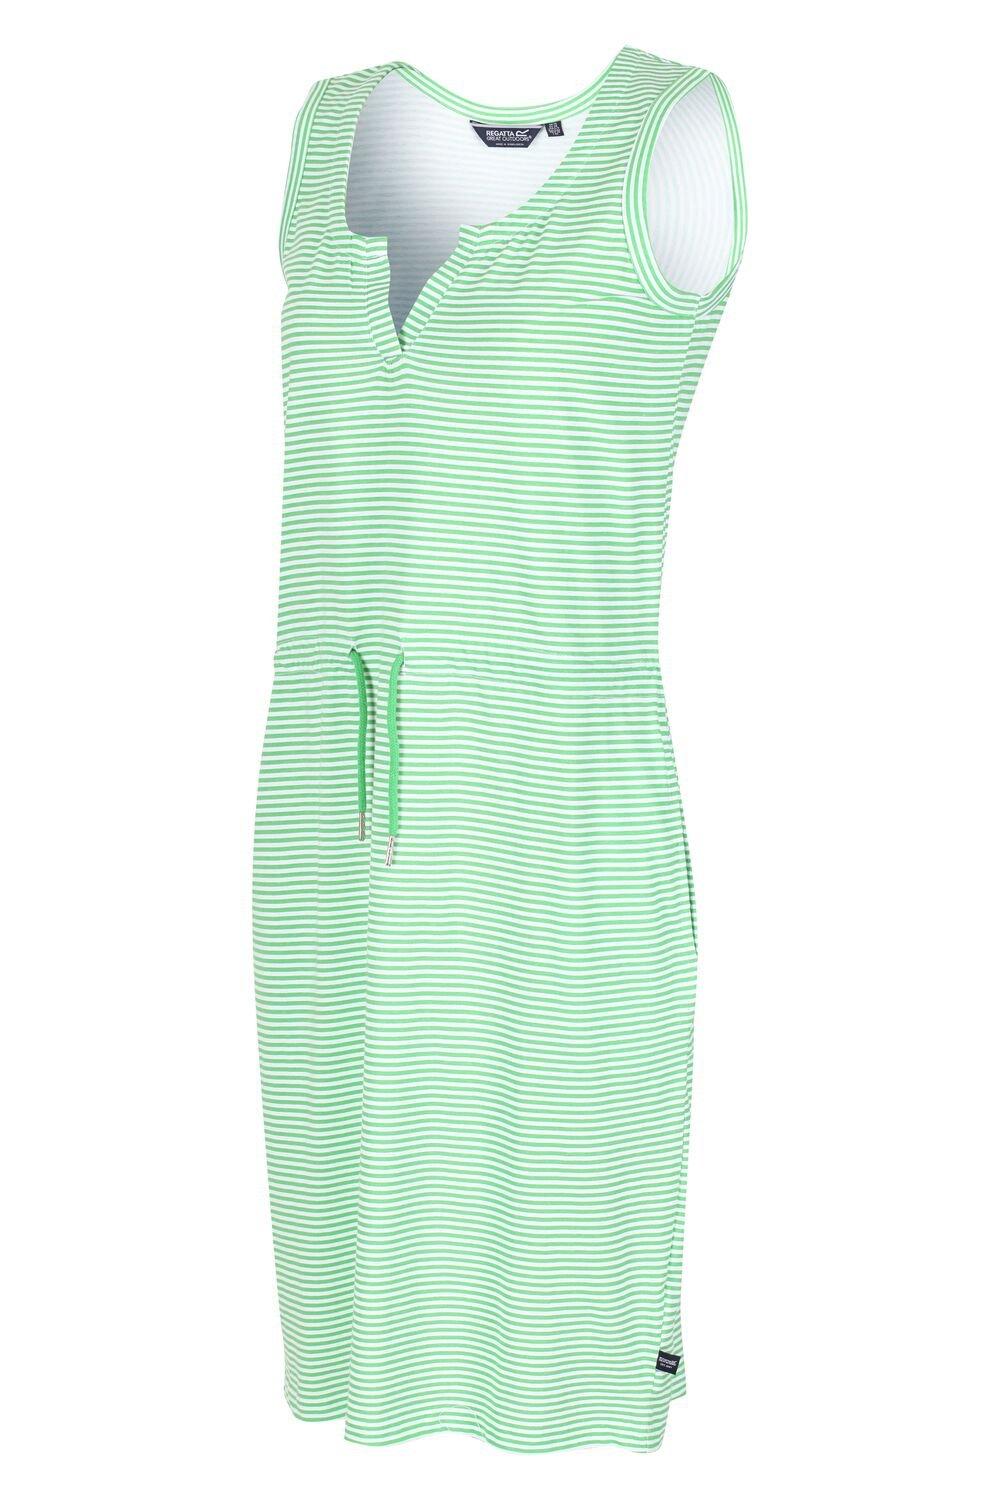 Coolweave Coolweave Cotton 'Fahari' Sleeveless Dress